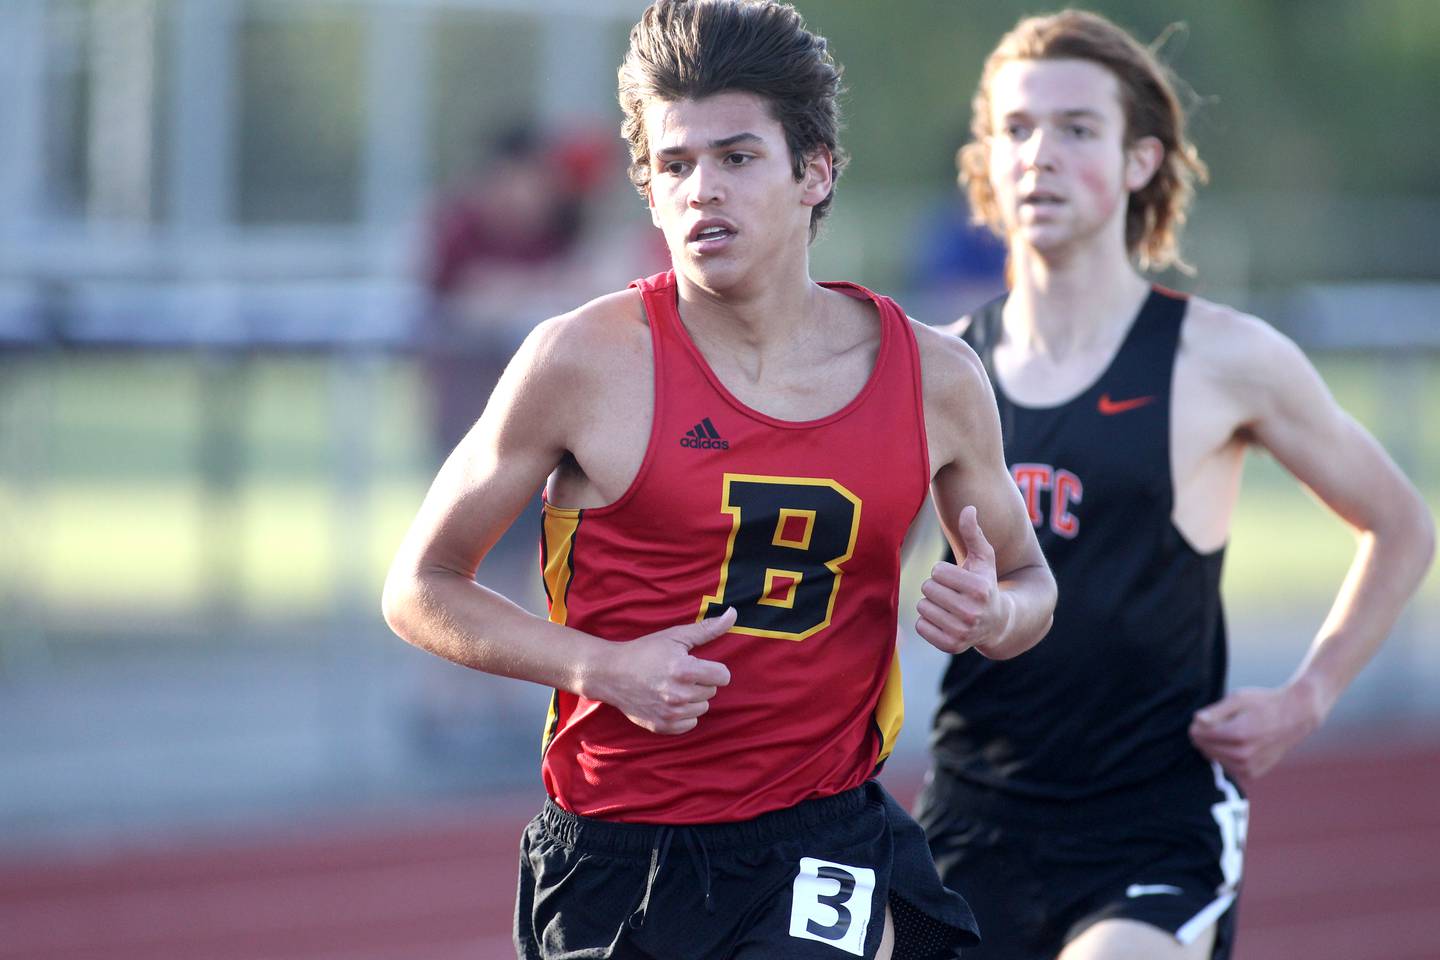 Batavia’s Quintin Lowe runs the 3200-meters during the Class 3A St. Charles North Sectional on Thursday, May 19, 2022.